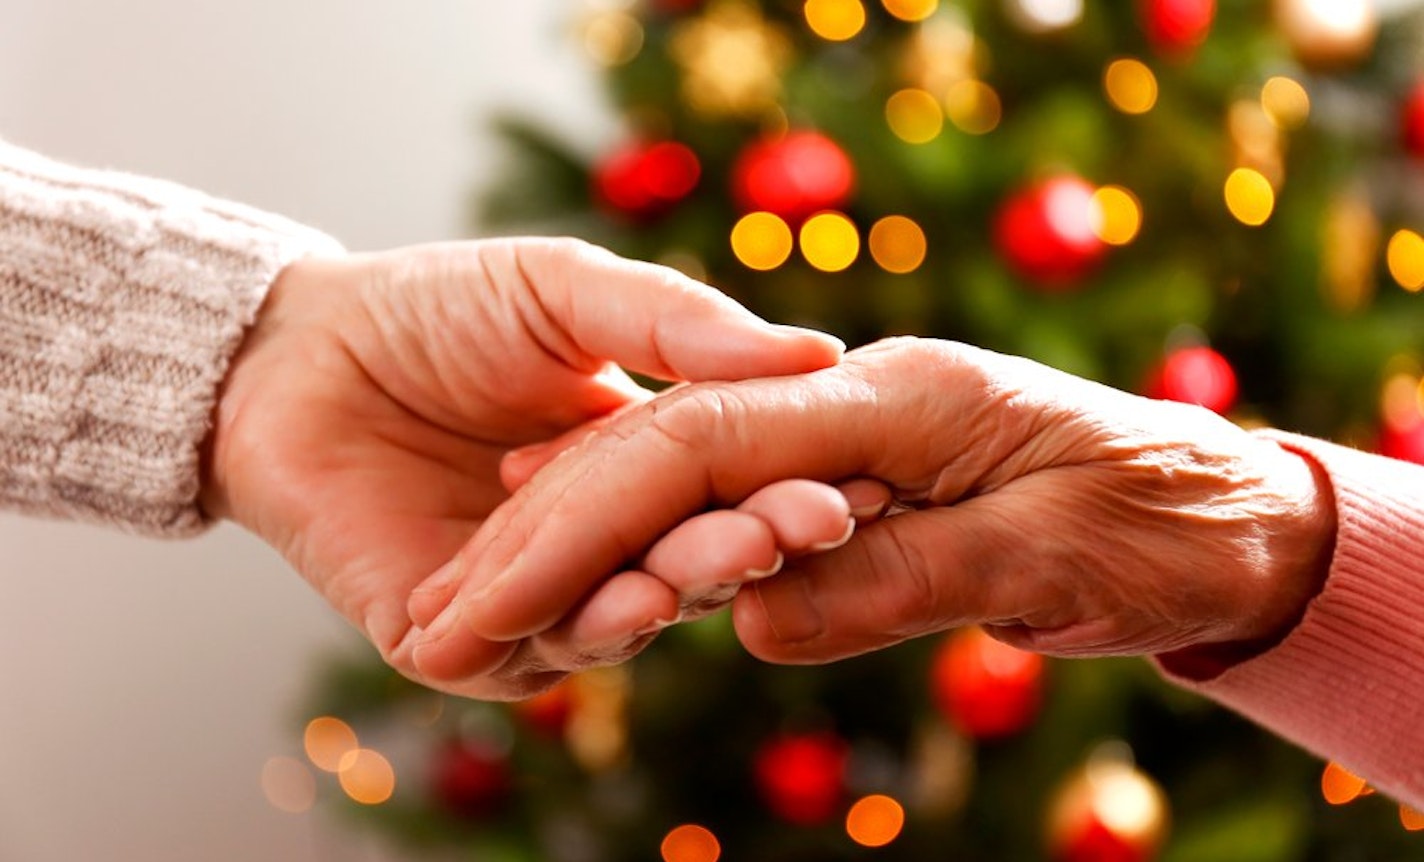 Caregiving Over The Holidays: Advice, Resources & Self-Care